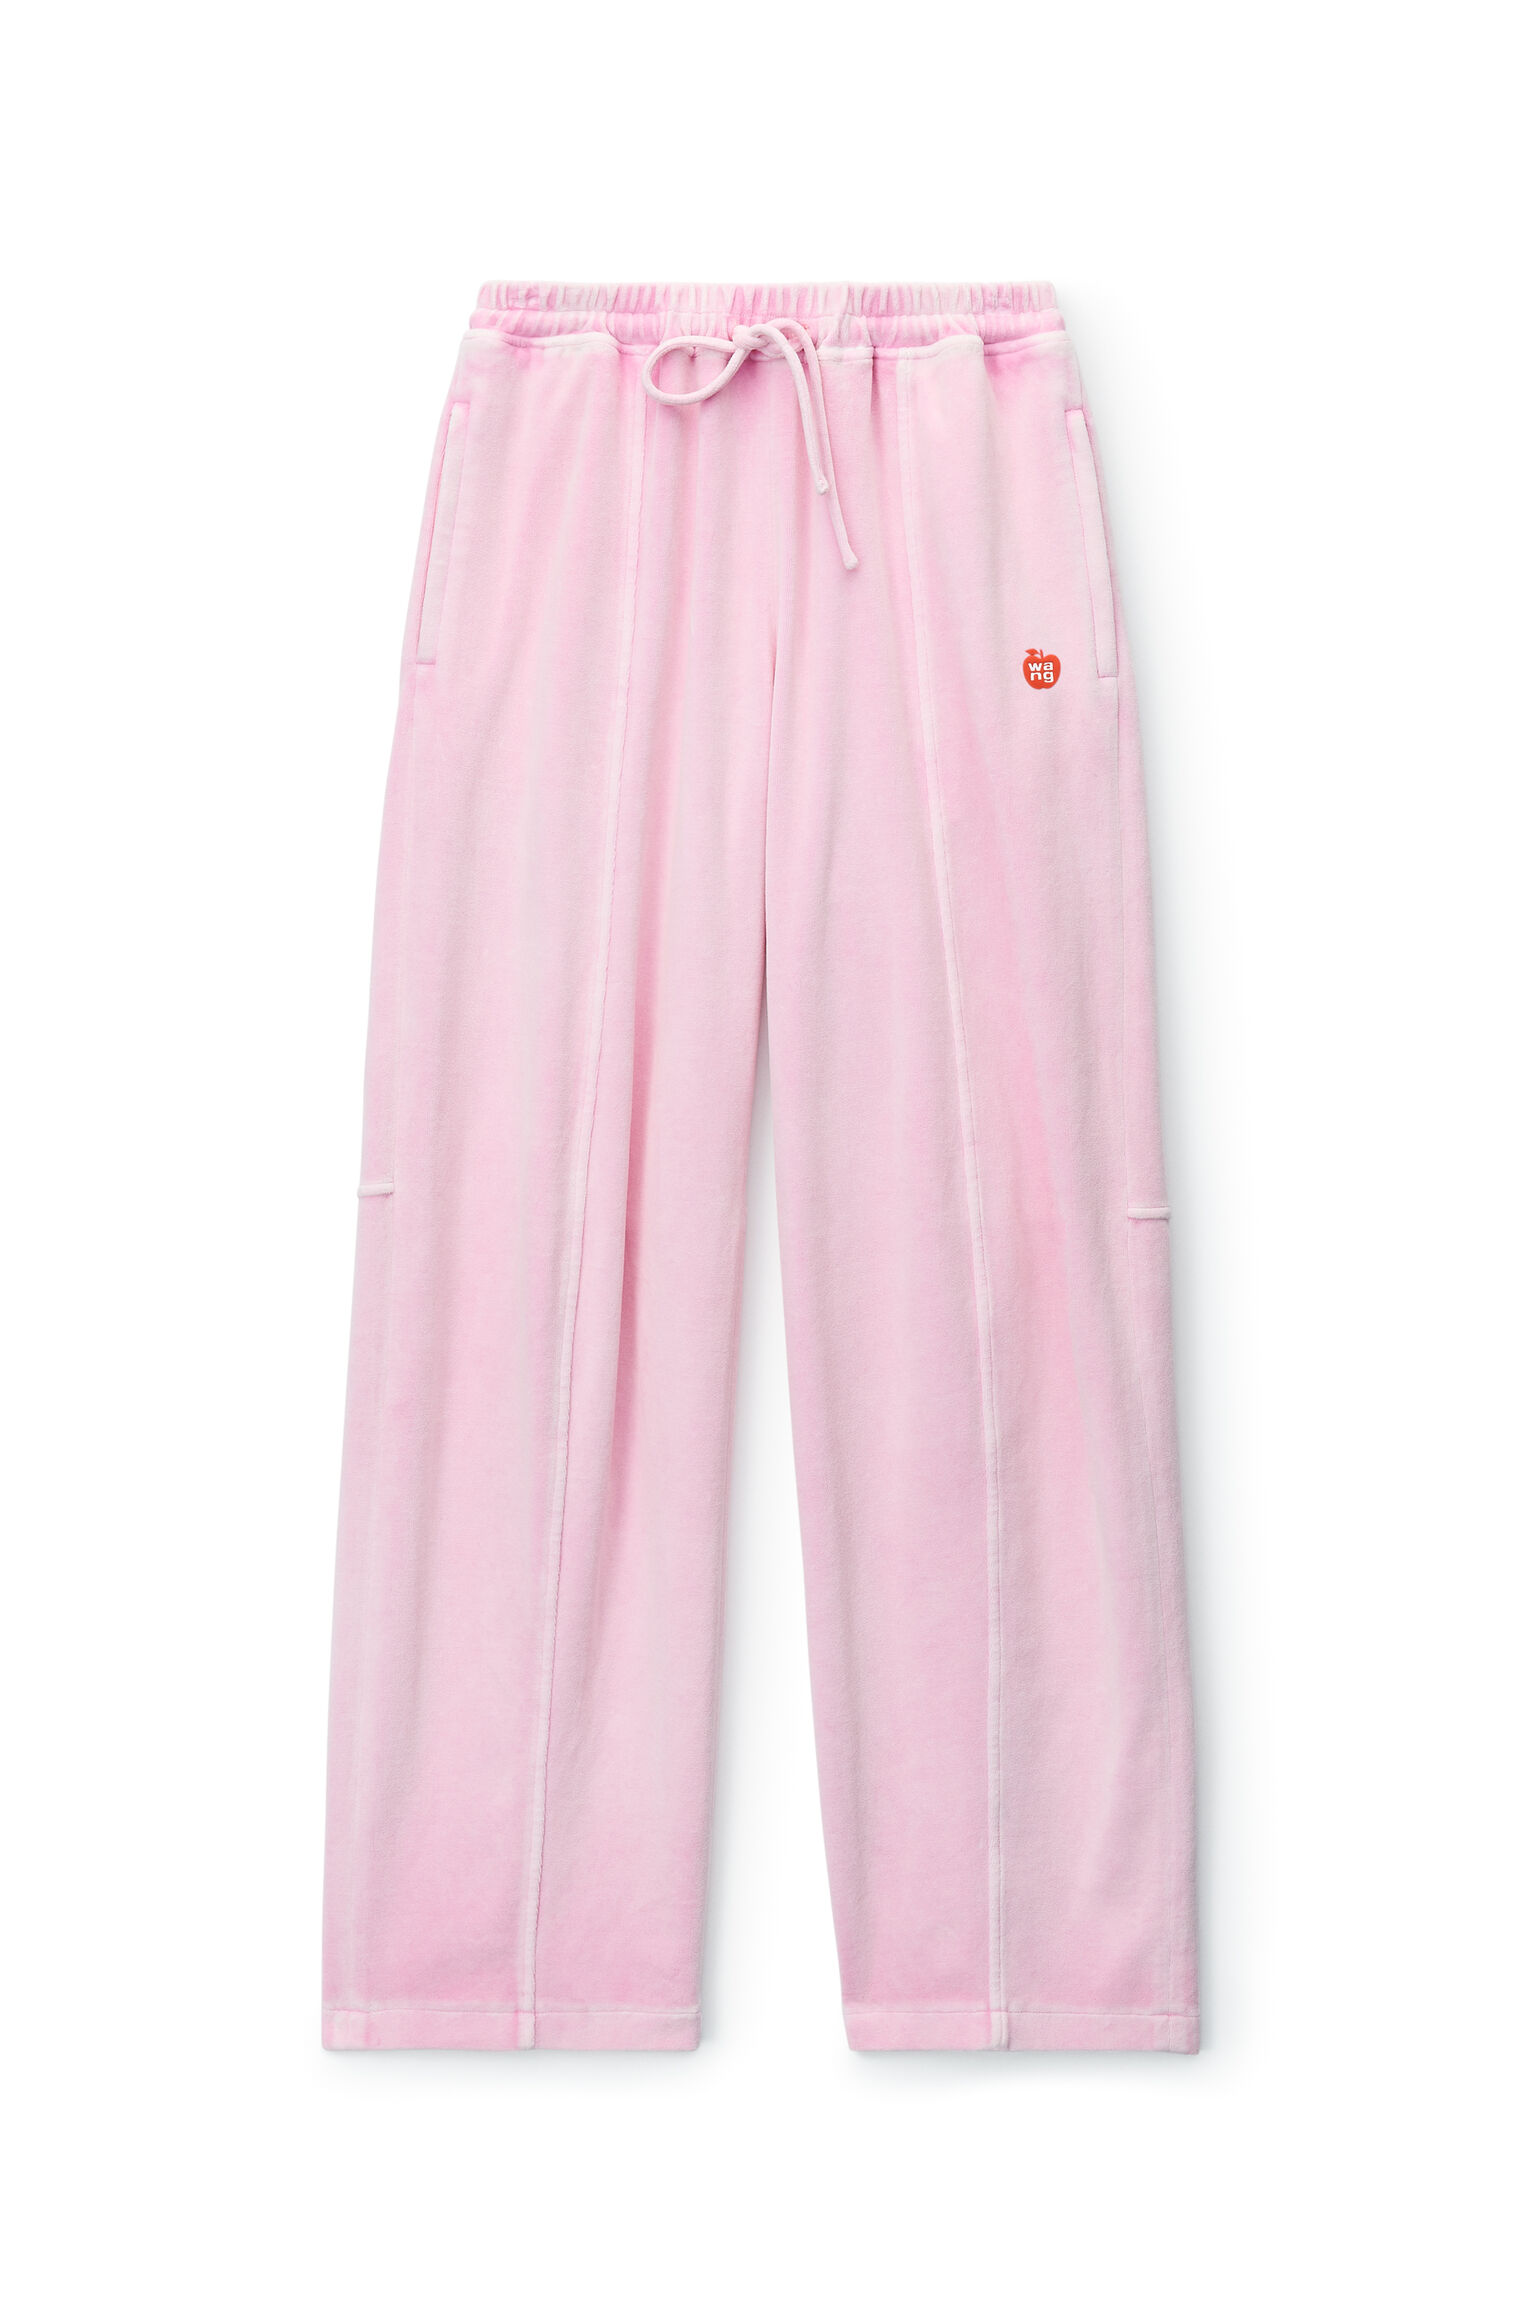 Buy Nelly Jazzy Flare Pants - Pink